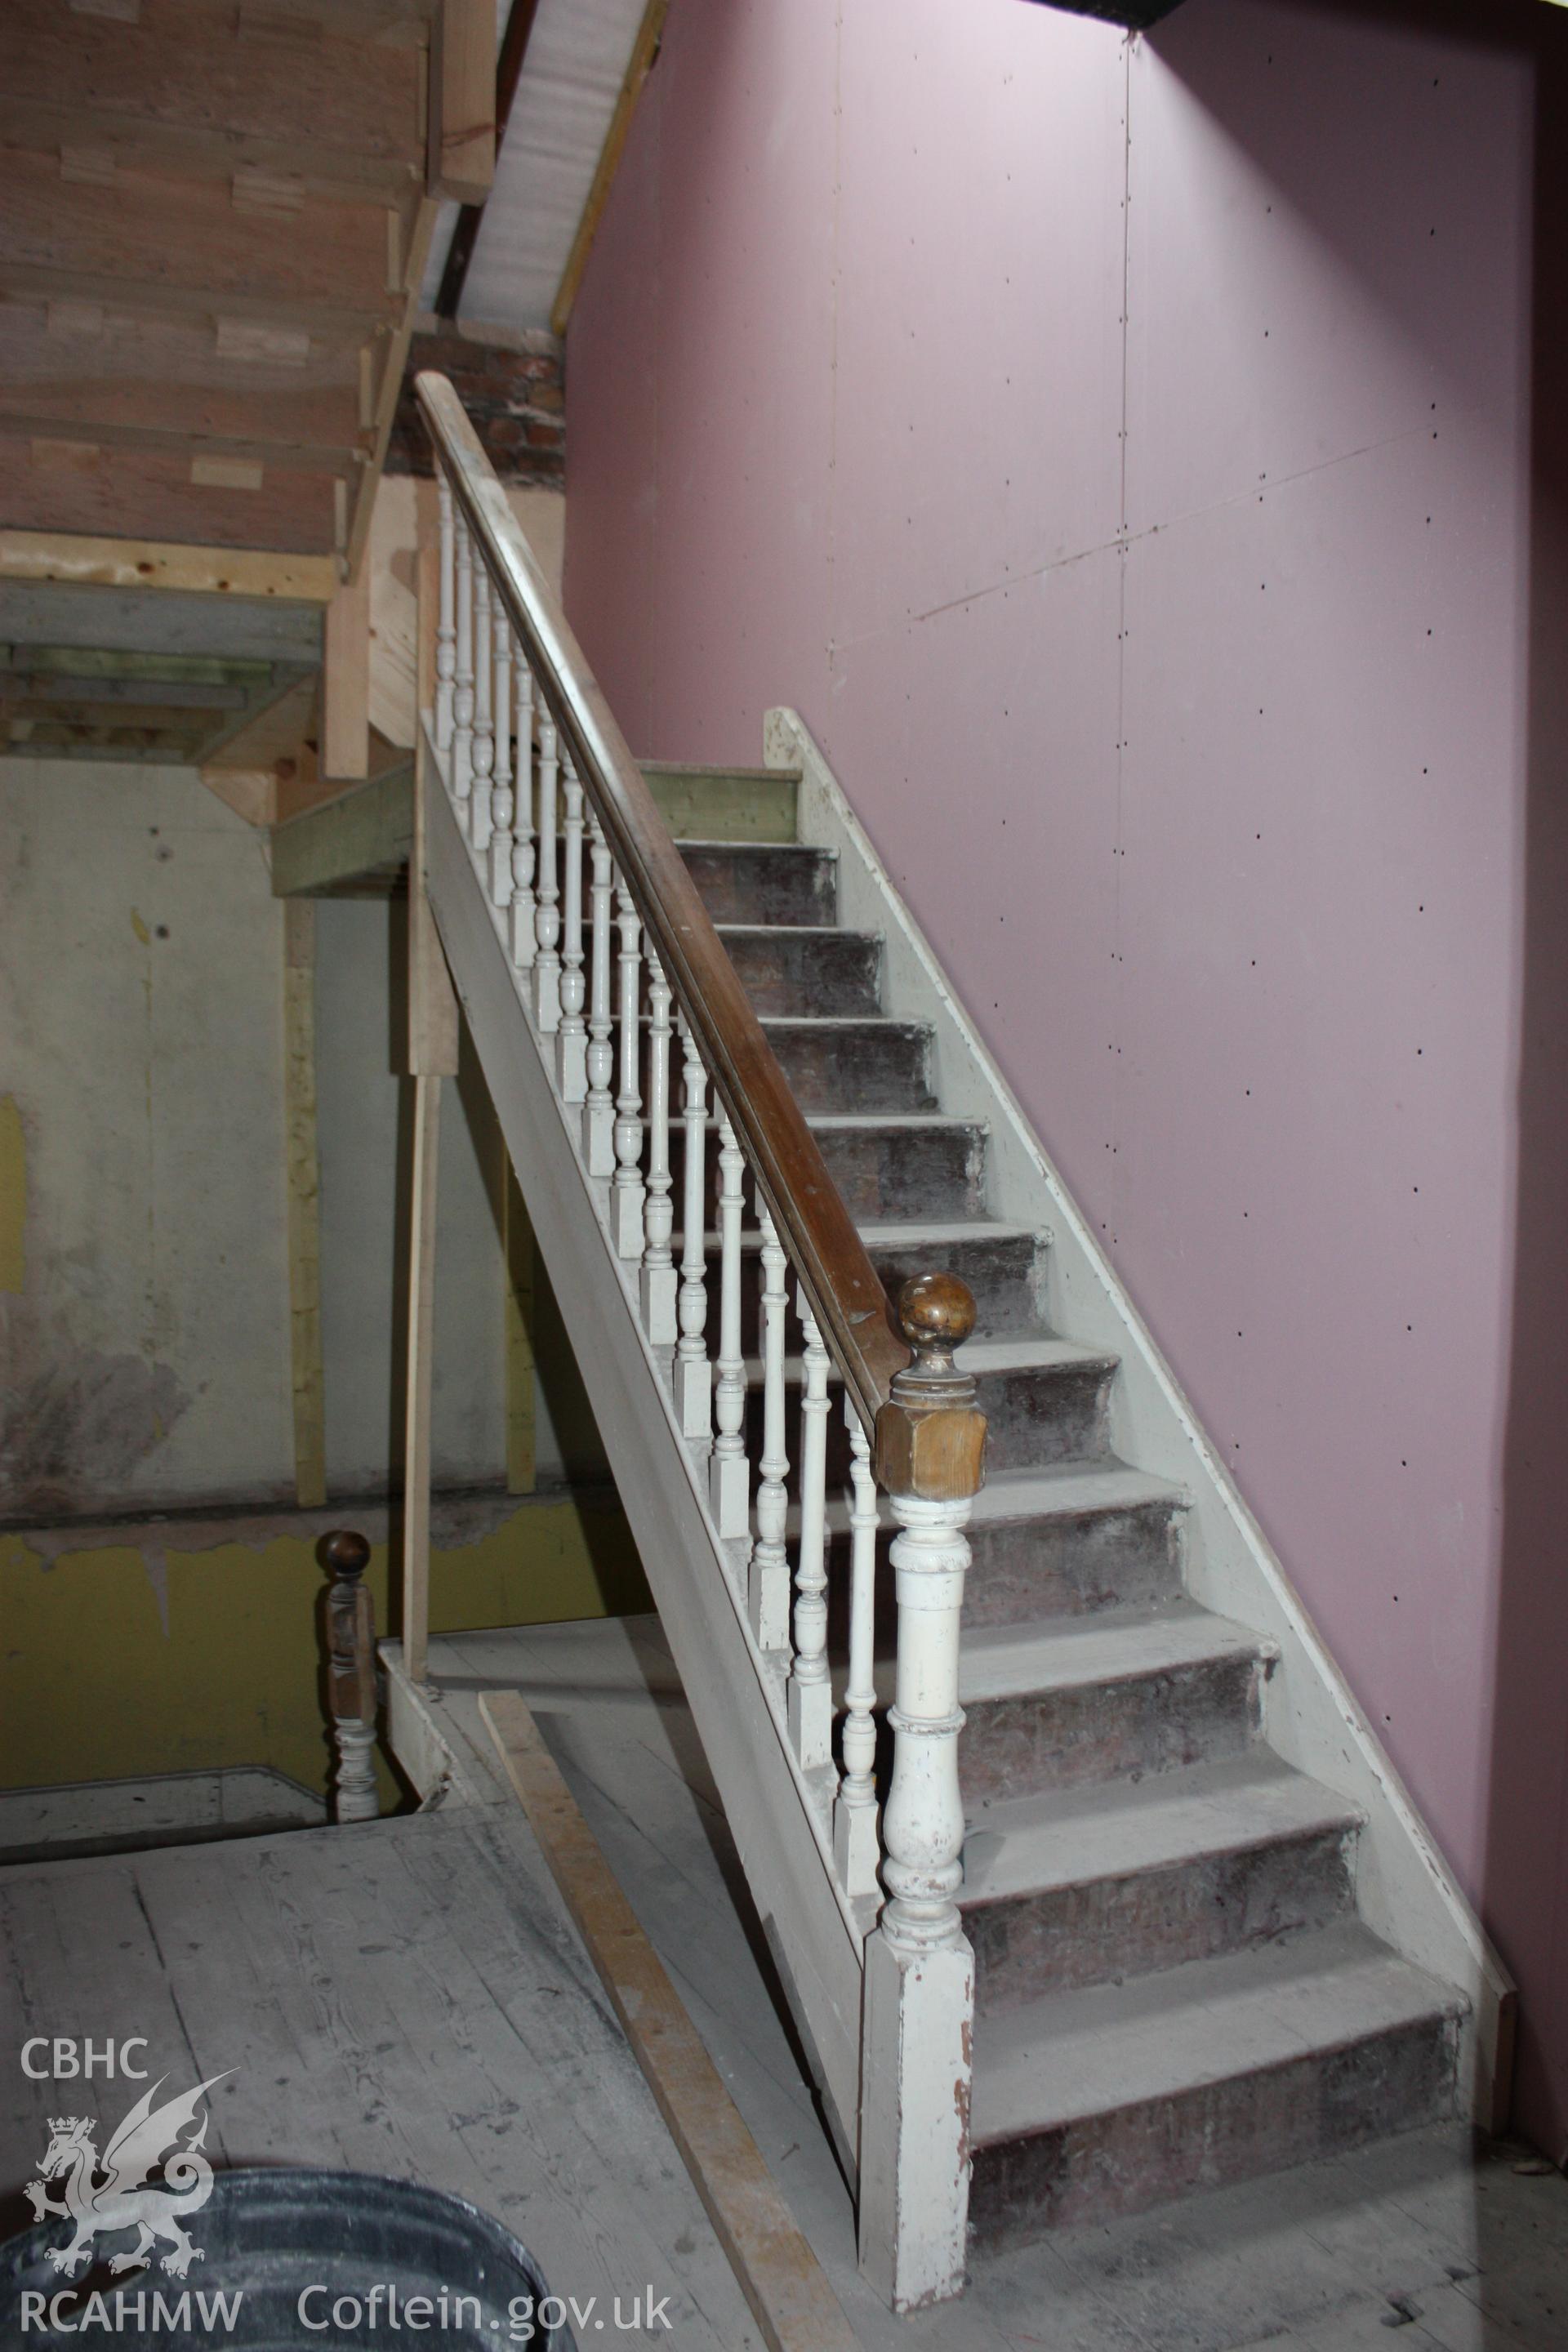 Colour photograph showing interior view of stair from second floor to the attic level at the Old Auction Rooms/ Liberal Club in Aberystwyth. Photographic survey conducted by Geoff Ward on 9th June 2010 during repair work prior to conversion into flats.